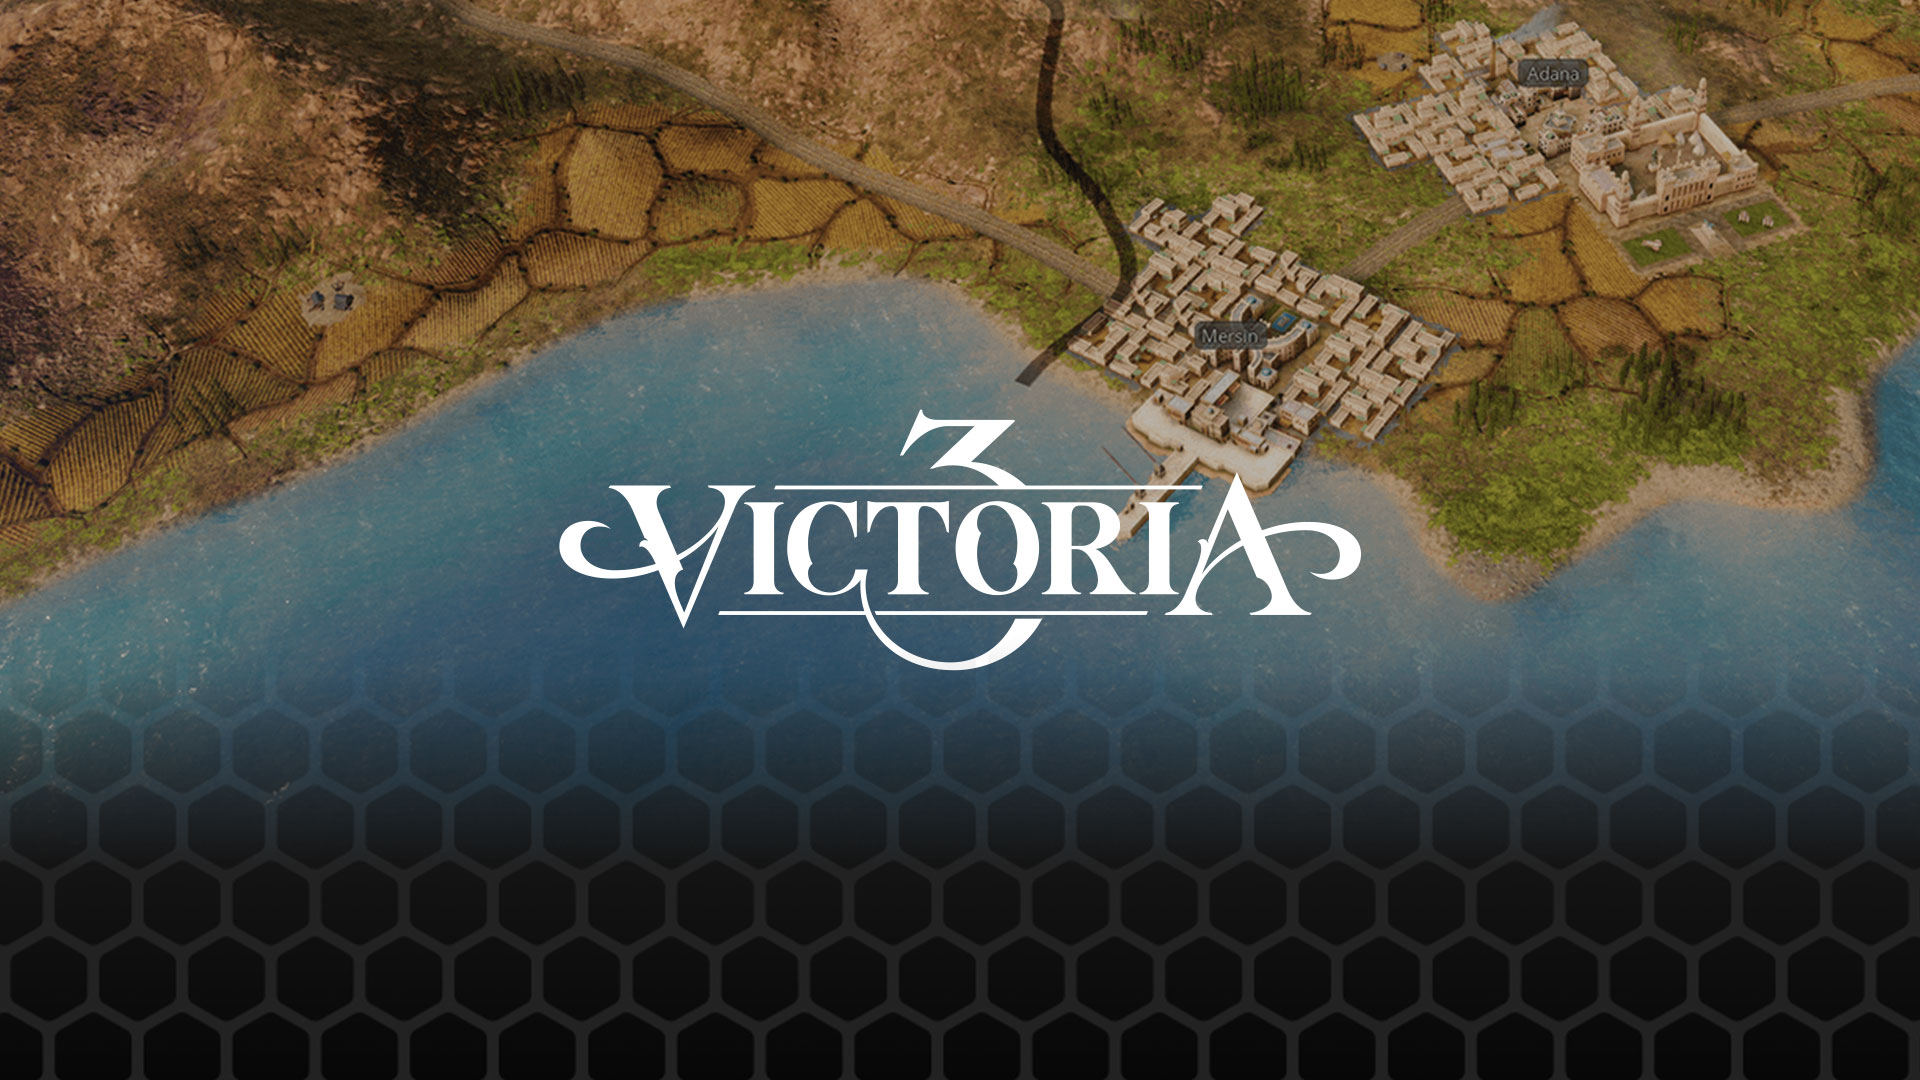 Victoria 3 title image for game page, showing the game name over a screenshot of a map